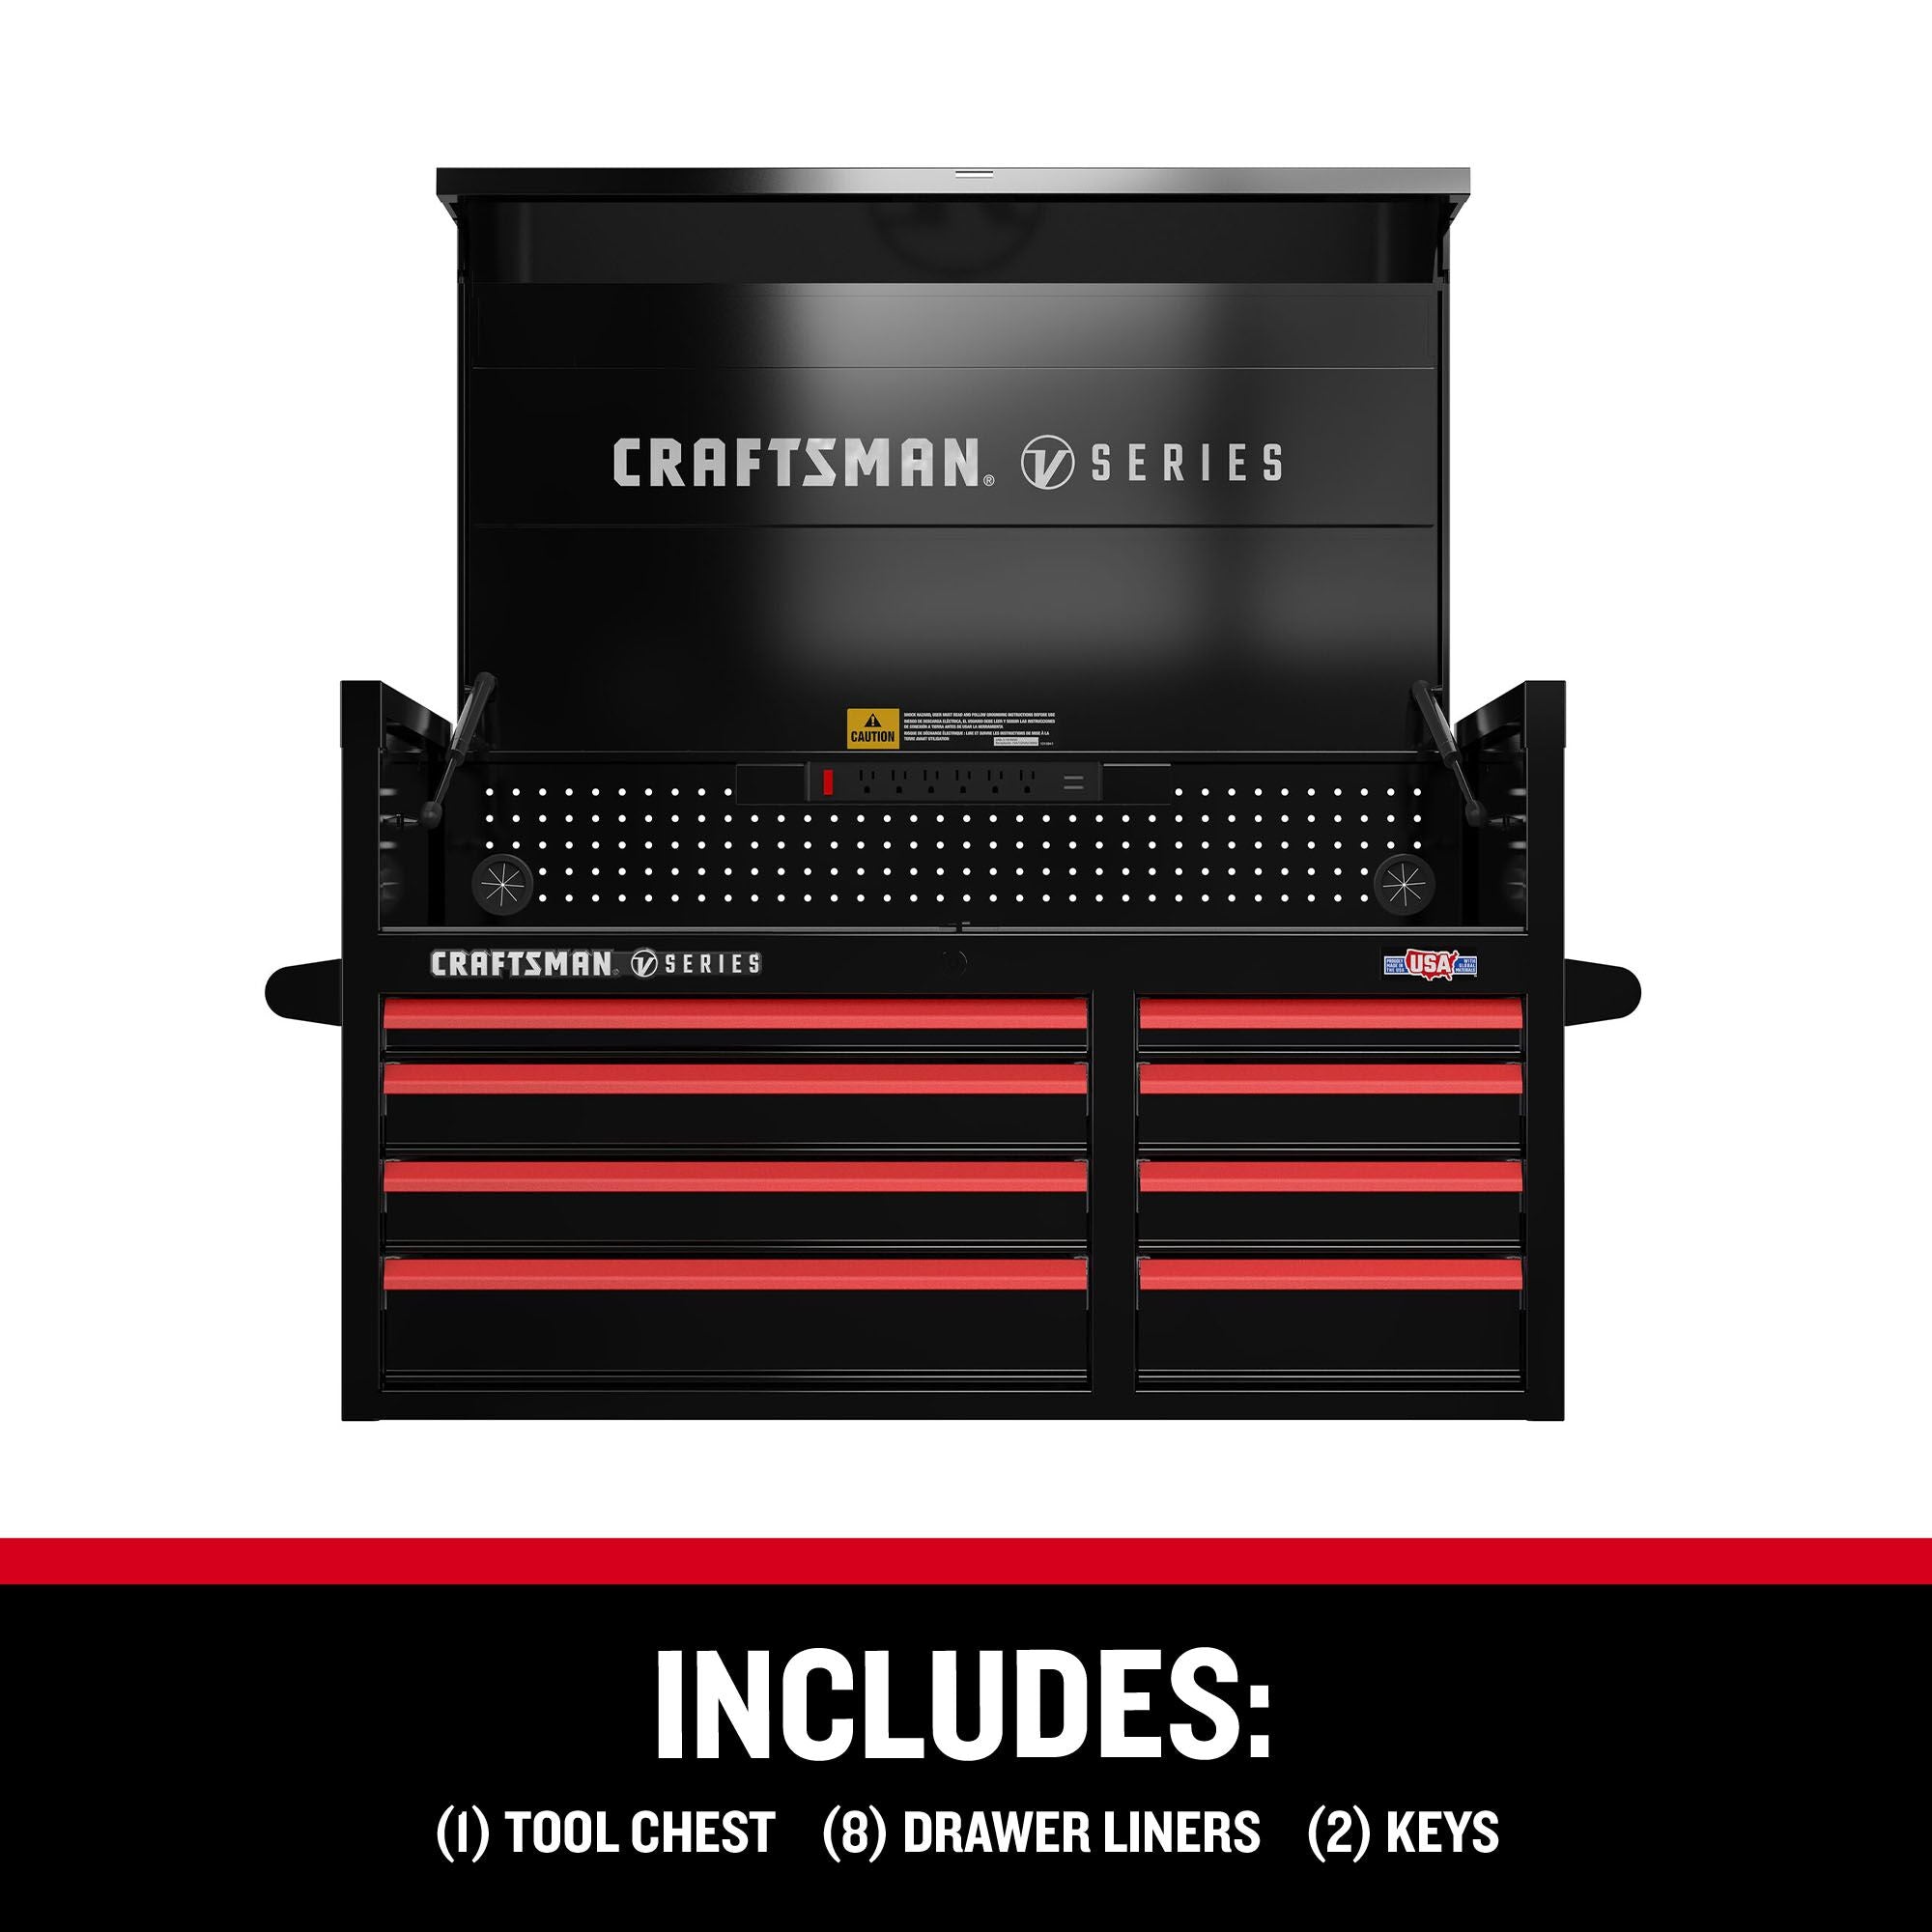 CRAFTSMAN V-Series 41-inch chest with includes feature call out